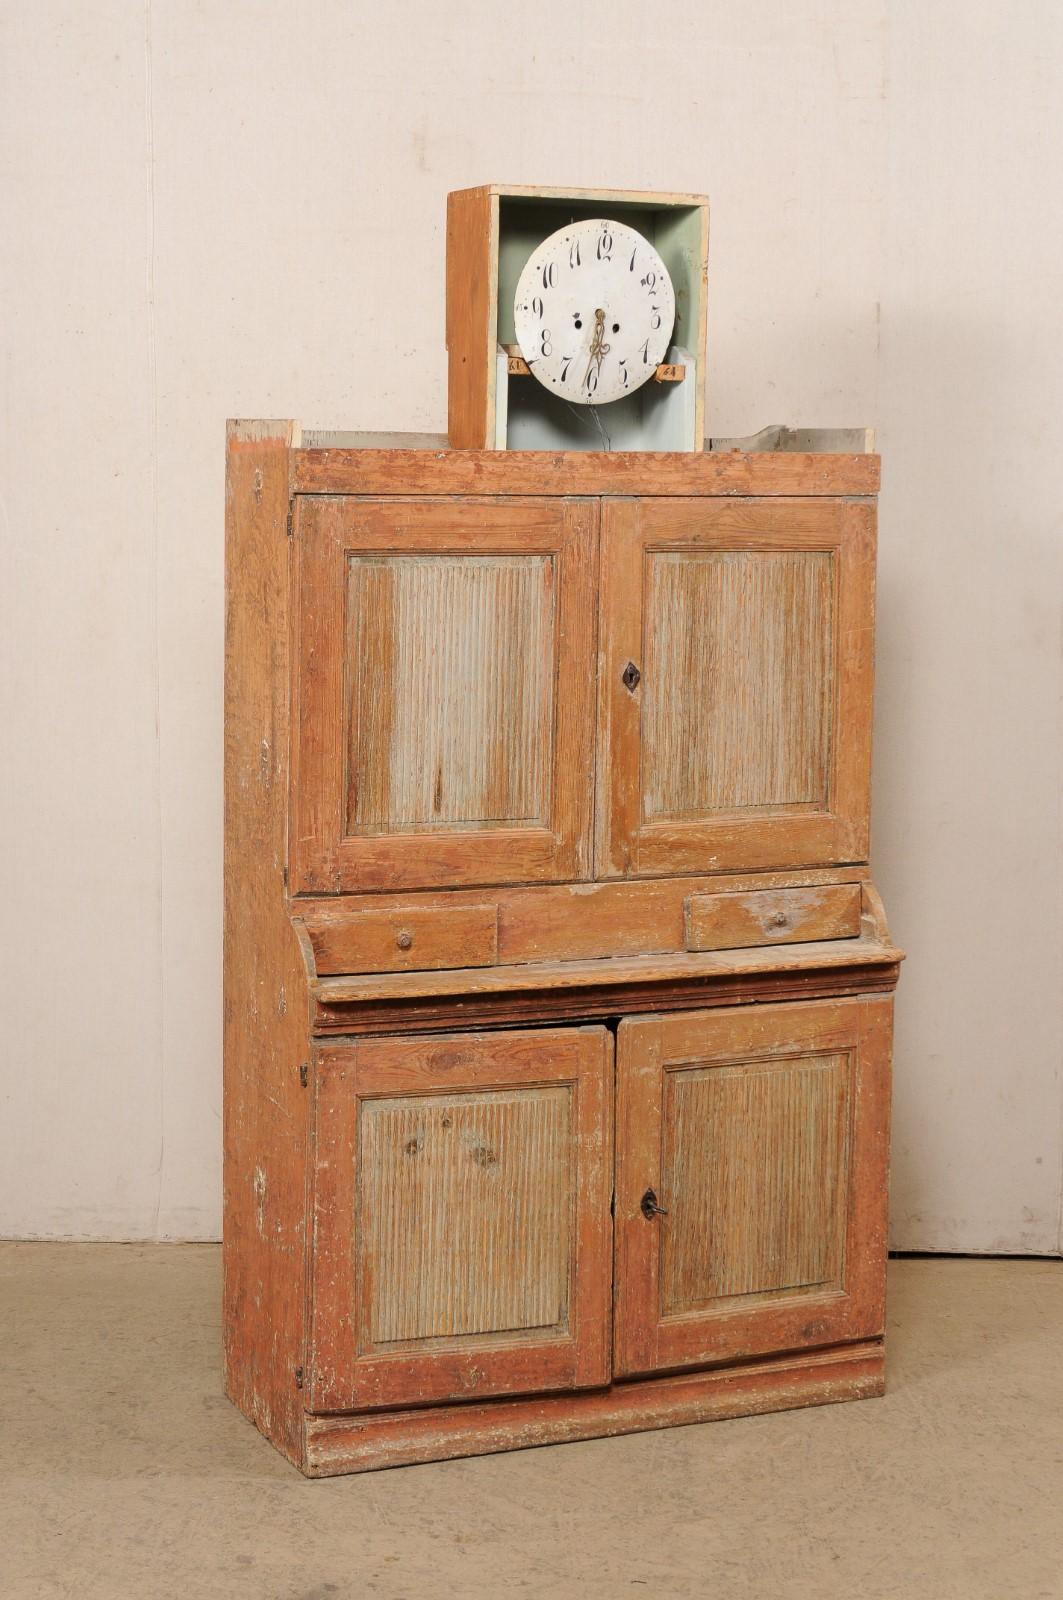 A Swedish Karl Johan period tall wooden clock cabinet from the early 19th century. This antique cabinet from Sweden, standing just shy of 7 feet in height, features an elegant swans-neck pediment style top, with clock set prominently within its